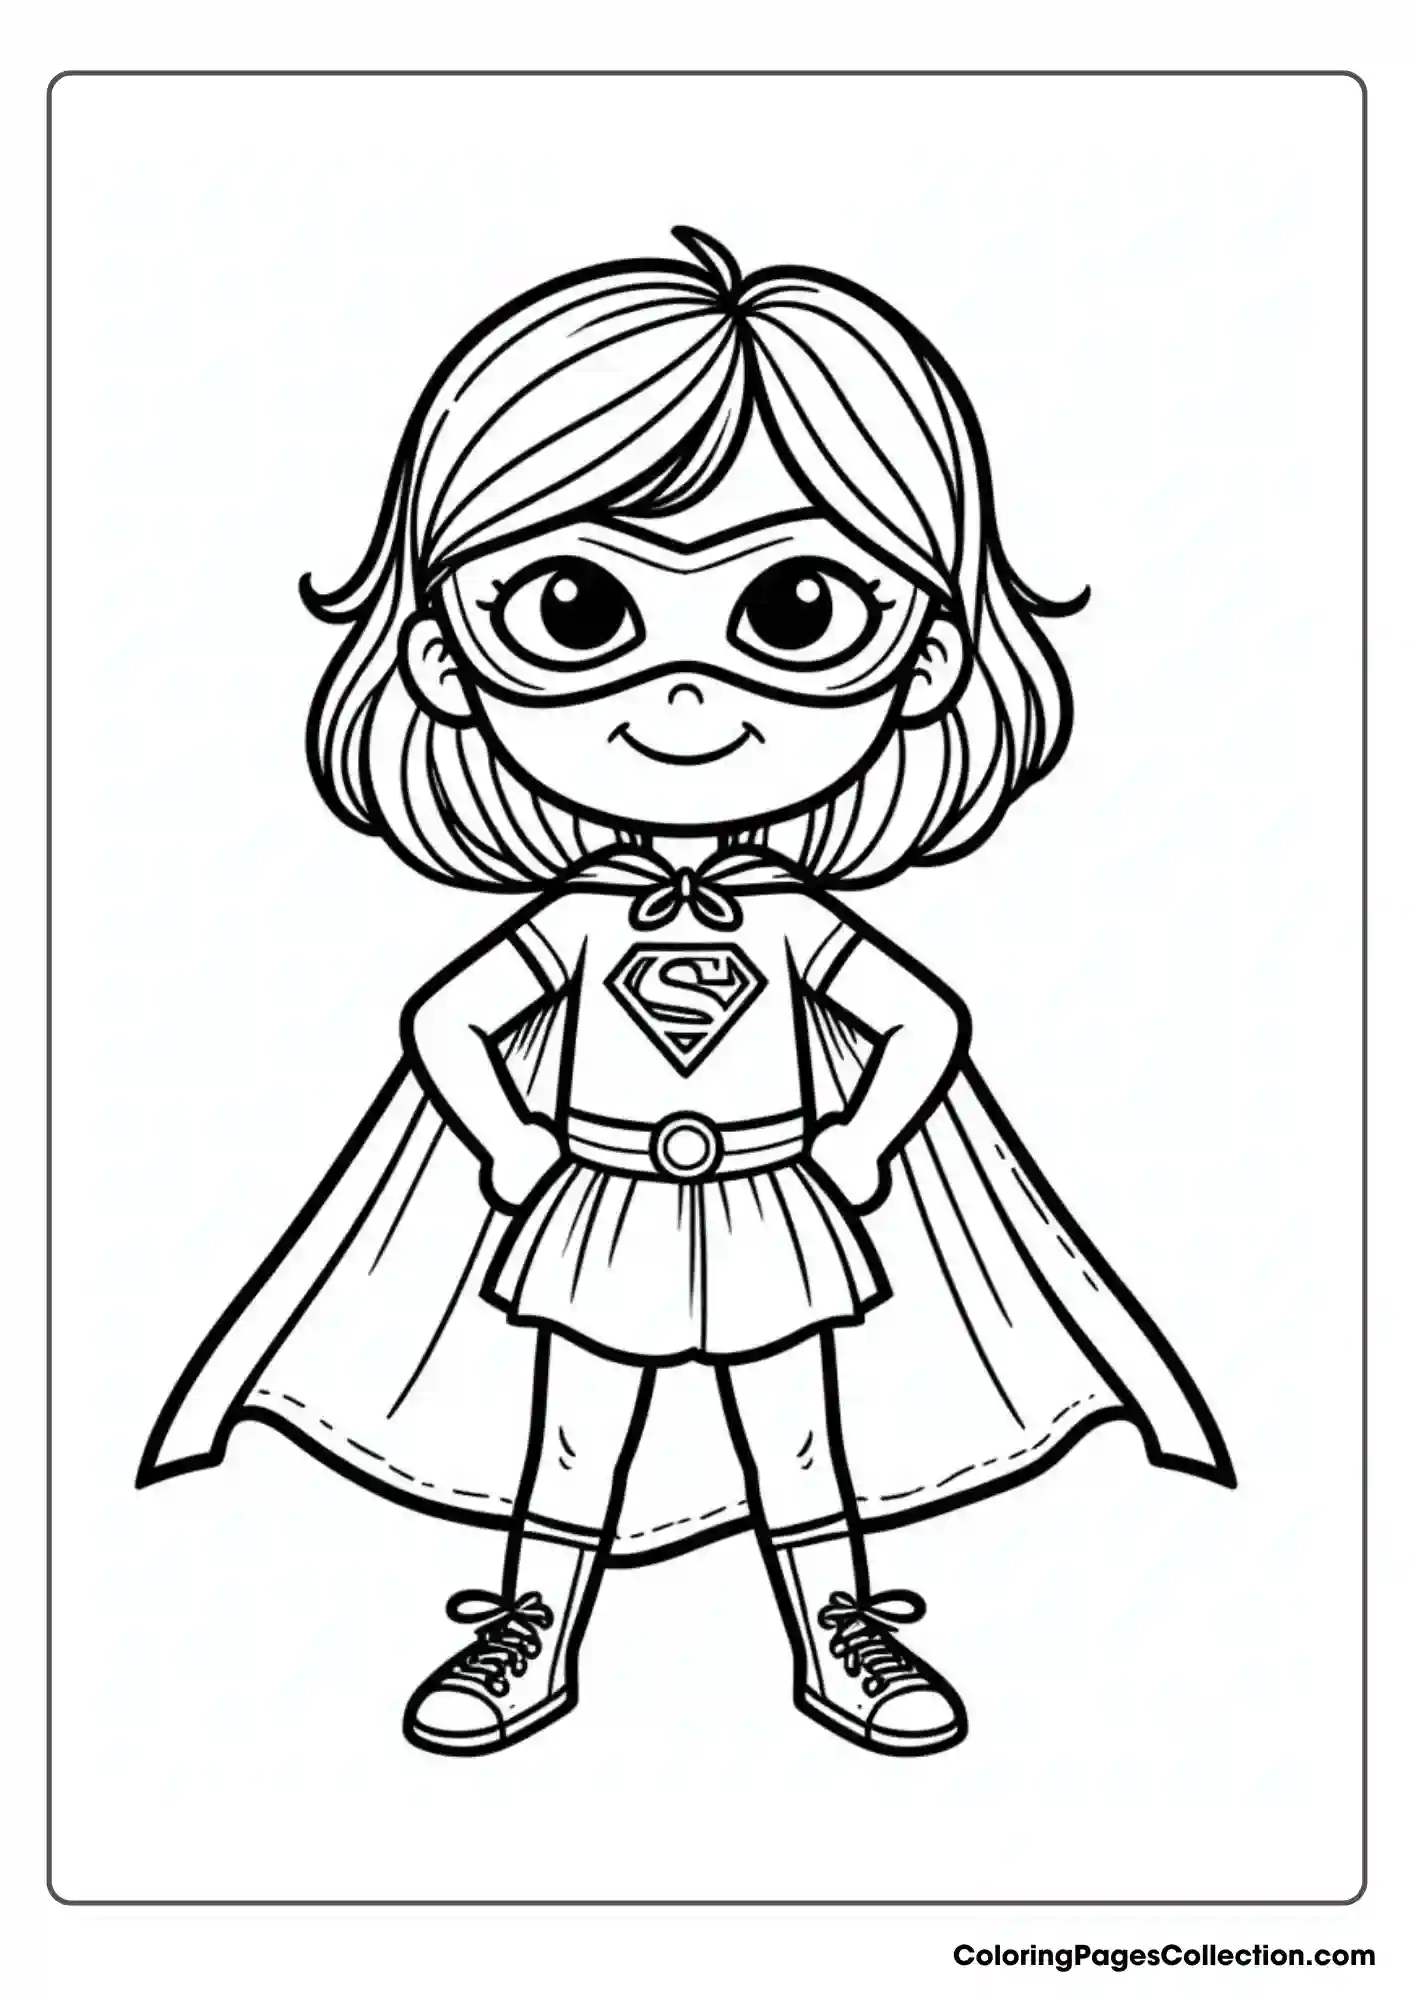 Superhero Coloring Pages For Kids